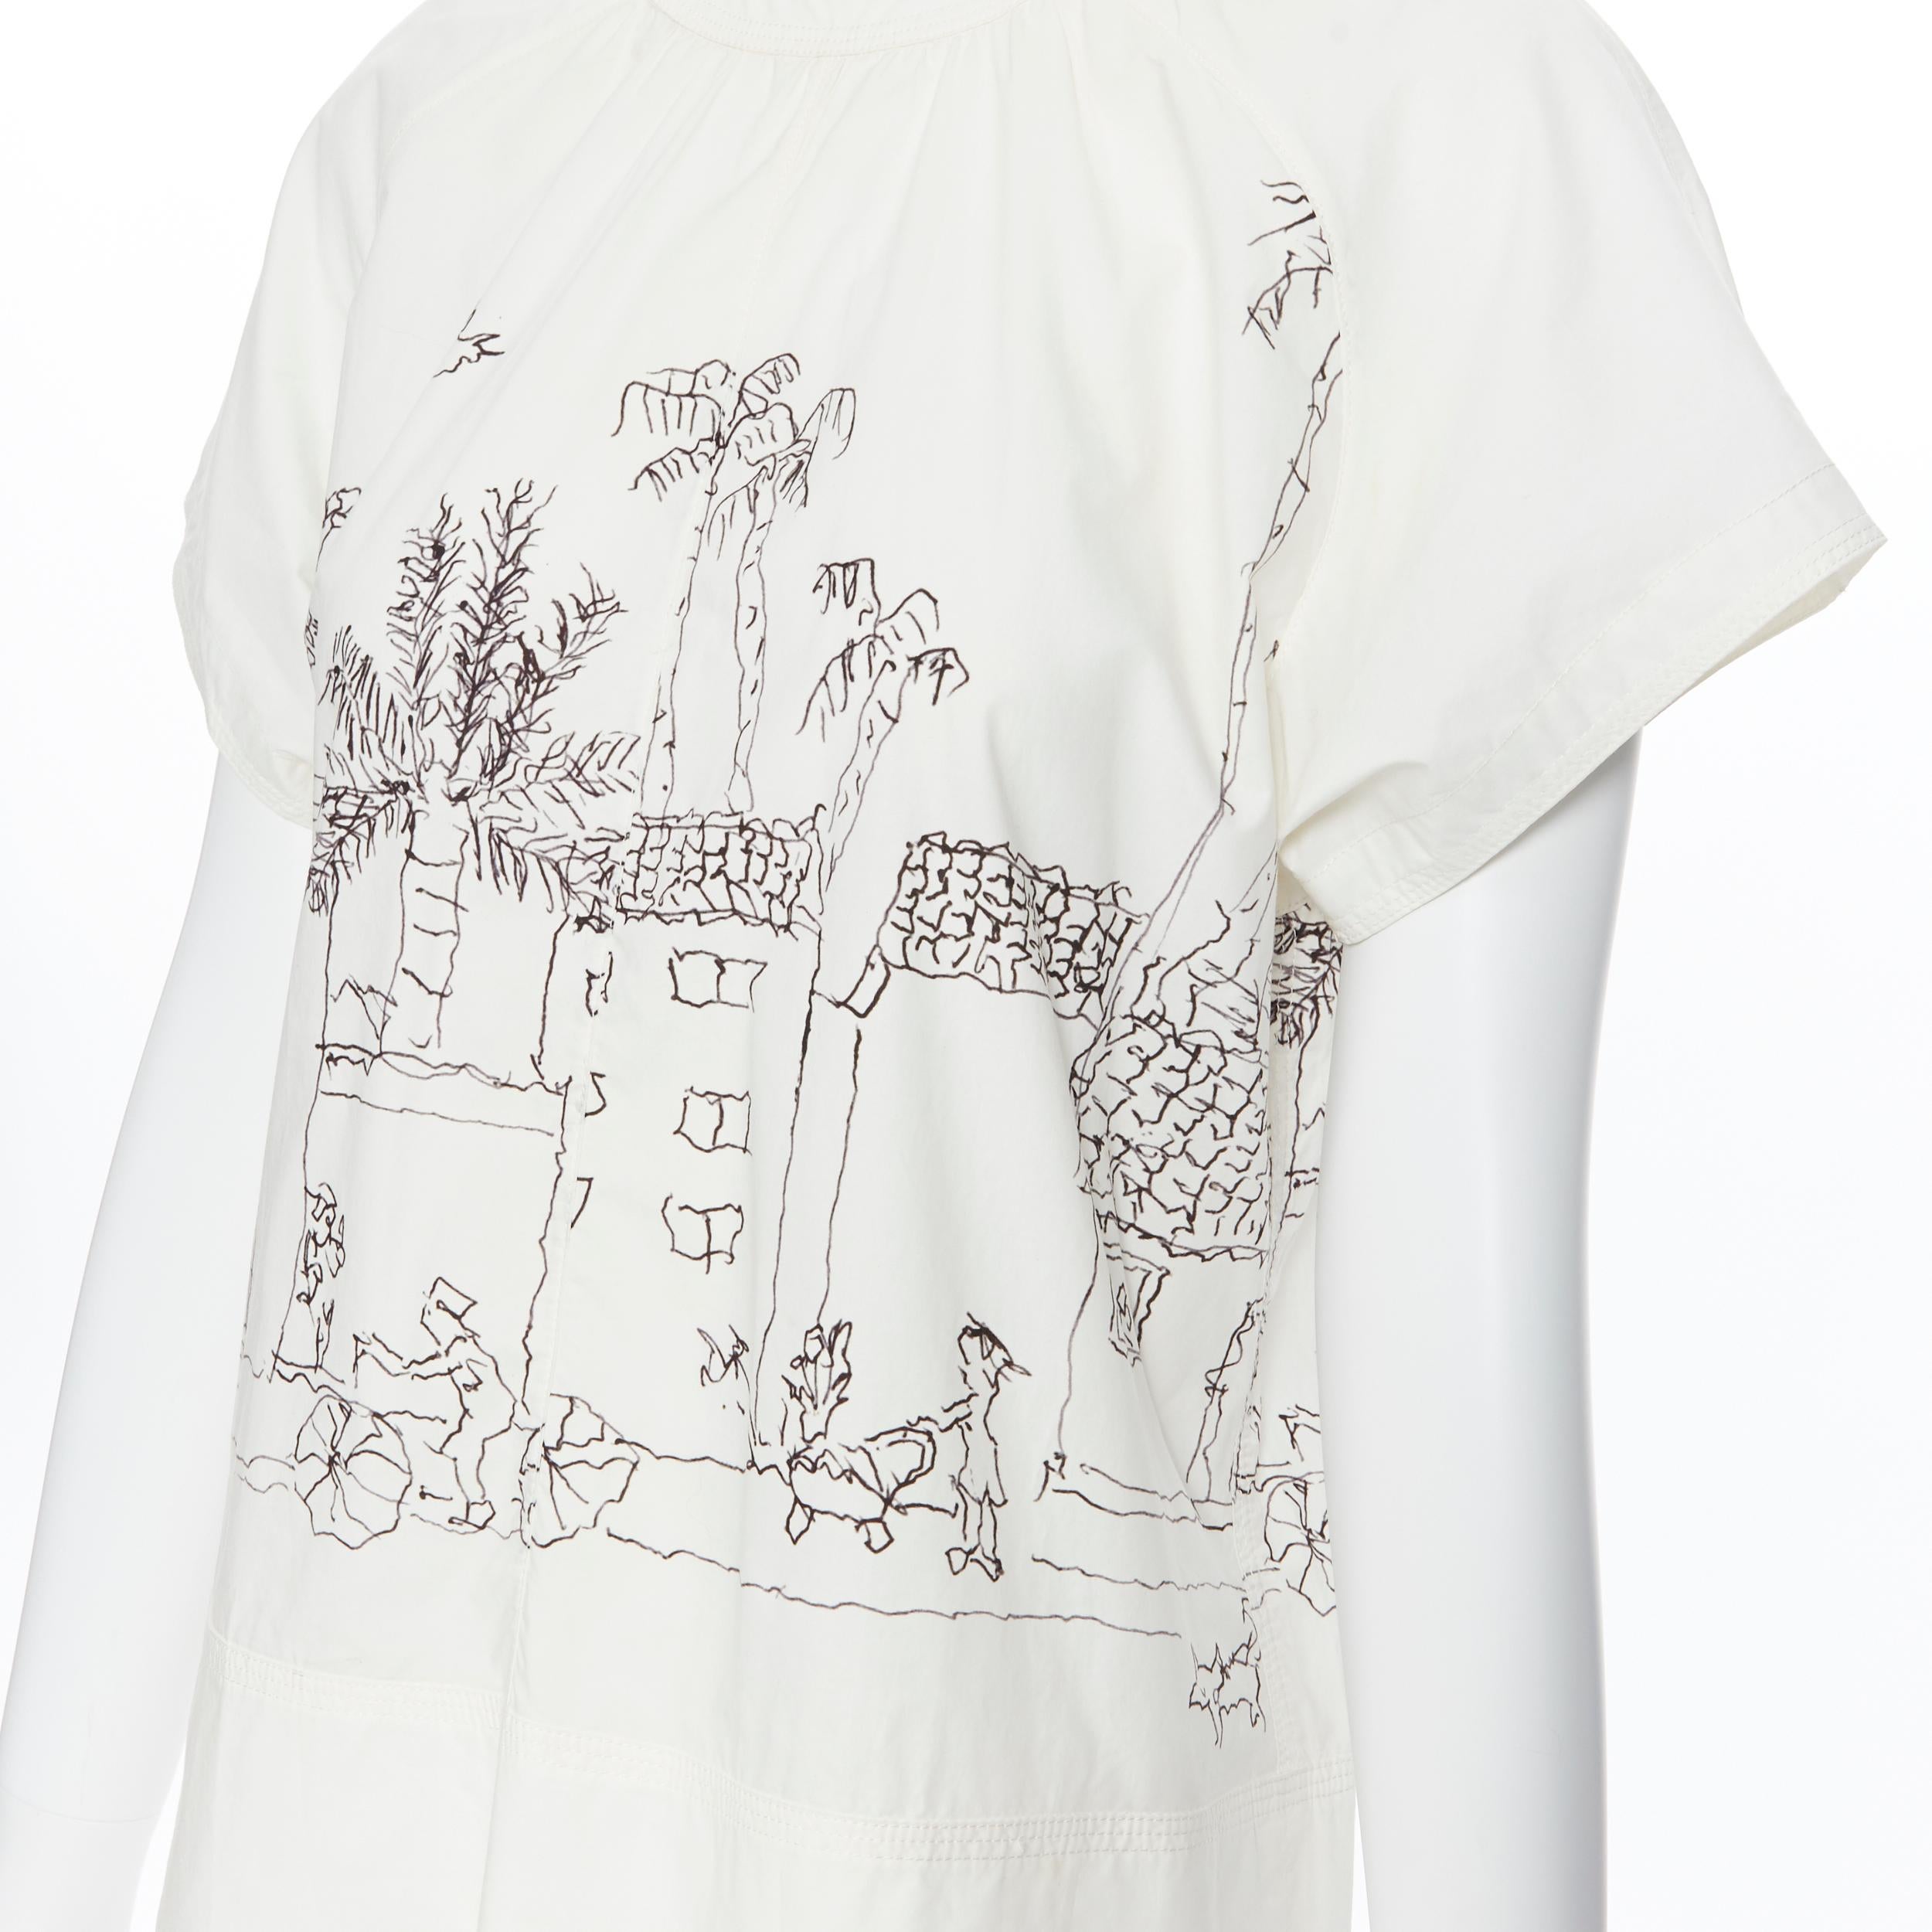 MARNI MARIA MAGDELENA SUAREZ artist illustration print white cotton top IT42
Brand: Marni
Model Name / Style: Printed top
Material: Cotton
Color: White
Pattern: Abstract
Closure: Zip
Extra Detail: Limited edition print.
Made in: Italy

CONDITION: